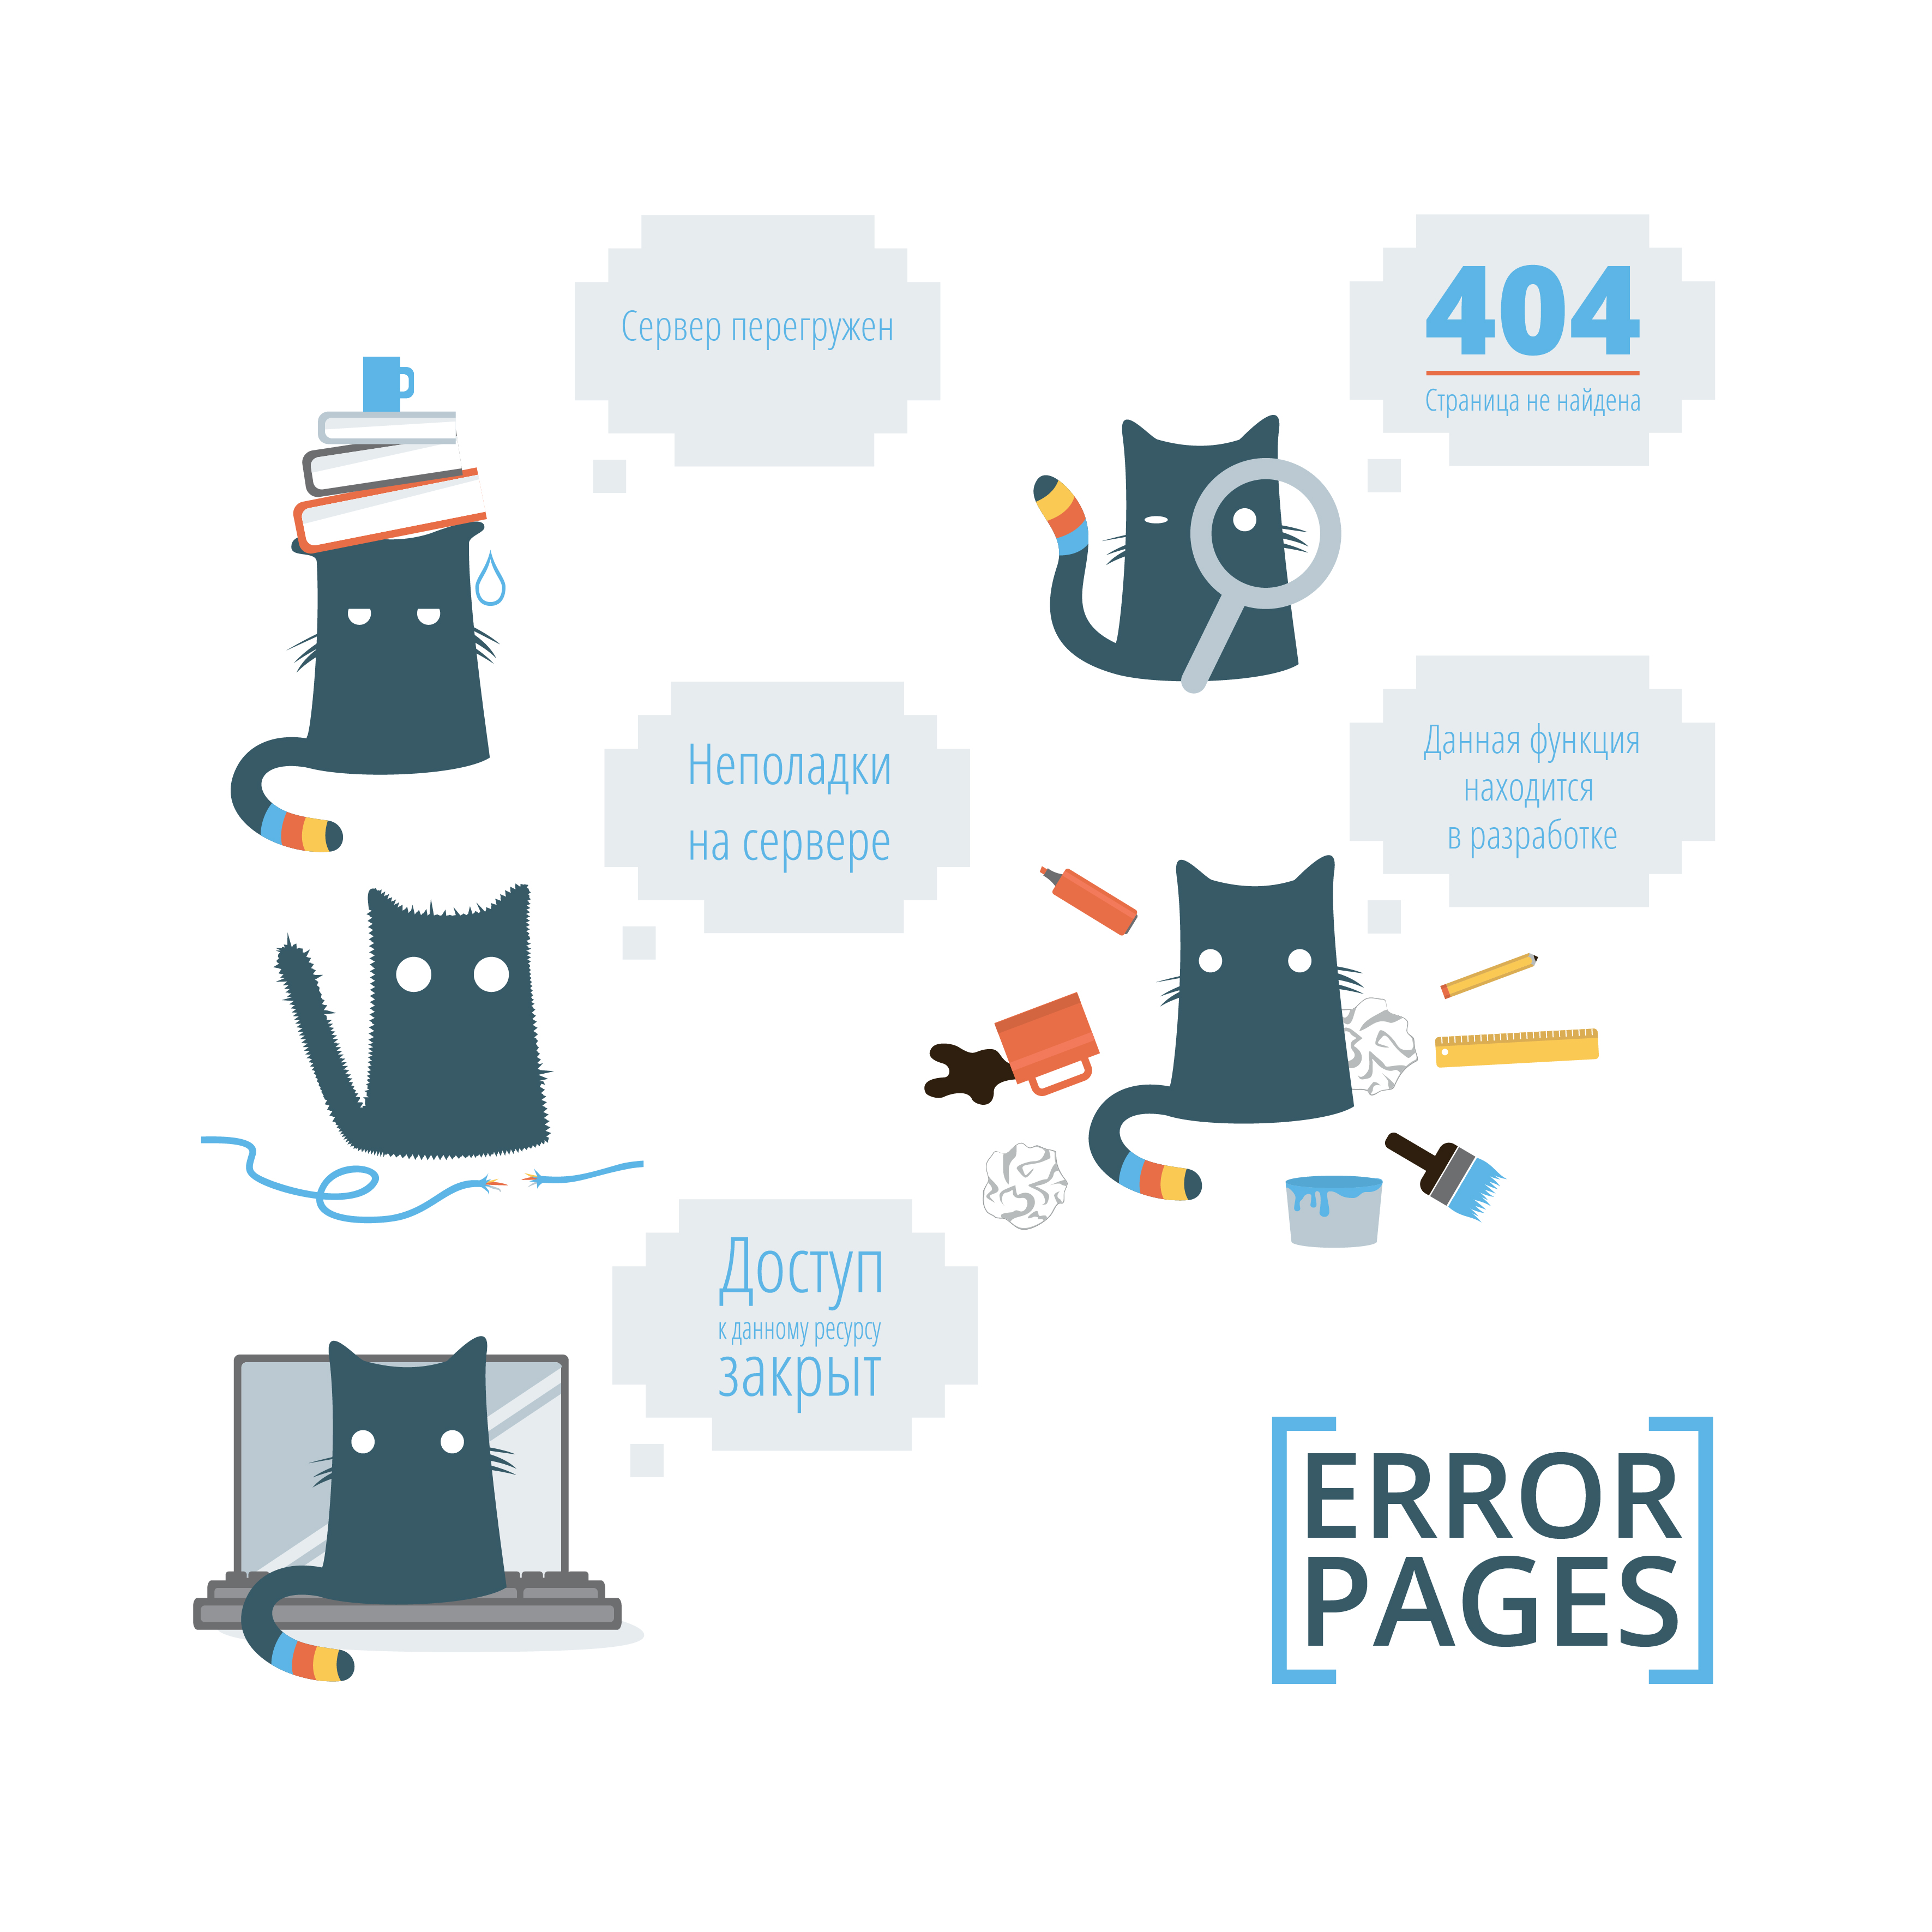 Error pages